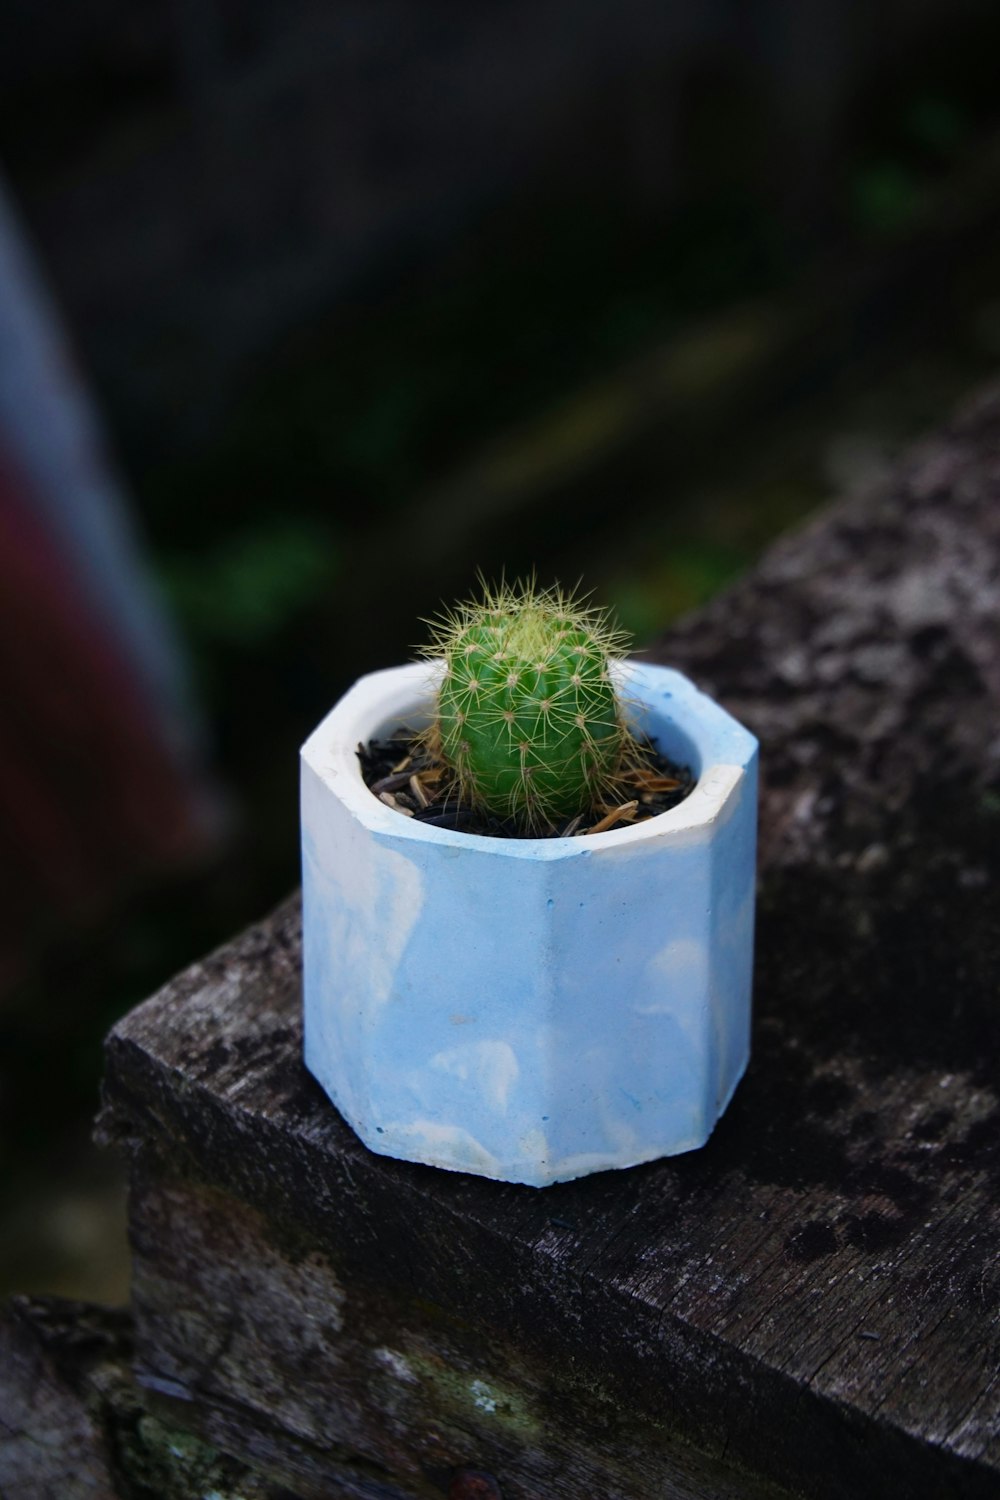 a small cactus in a blue pot on a wooden table